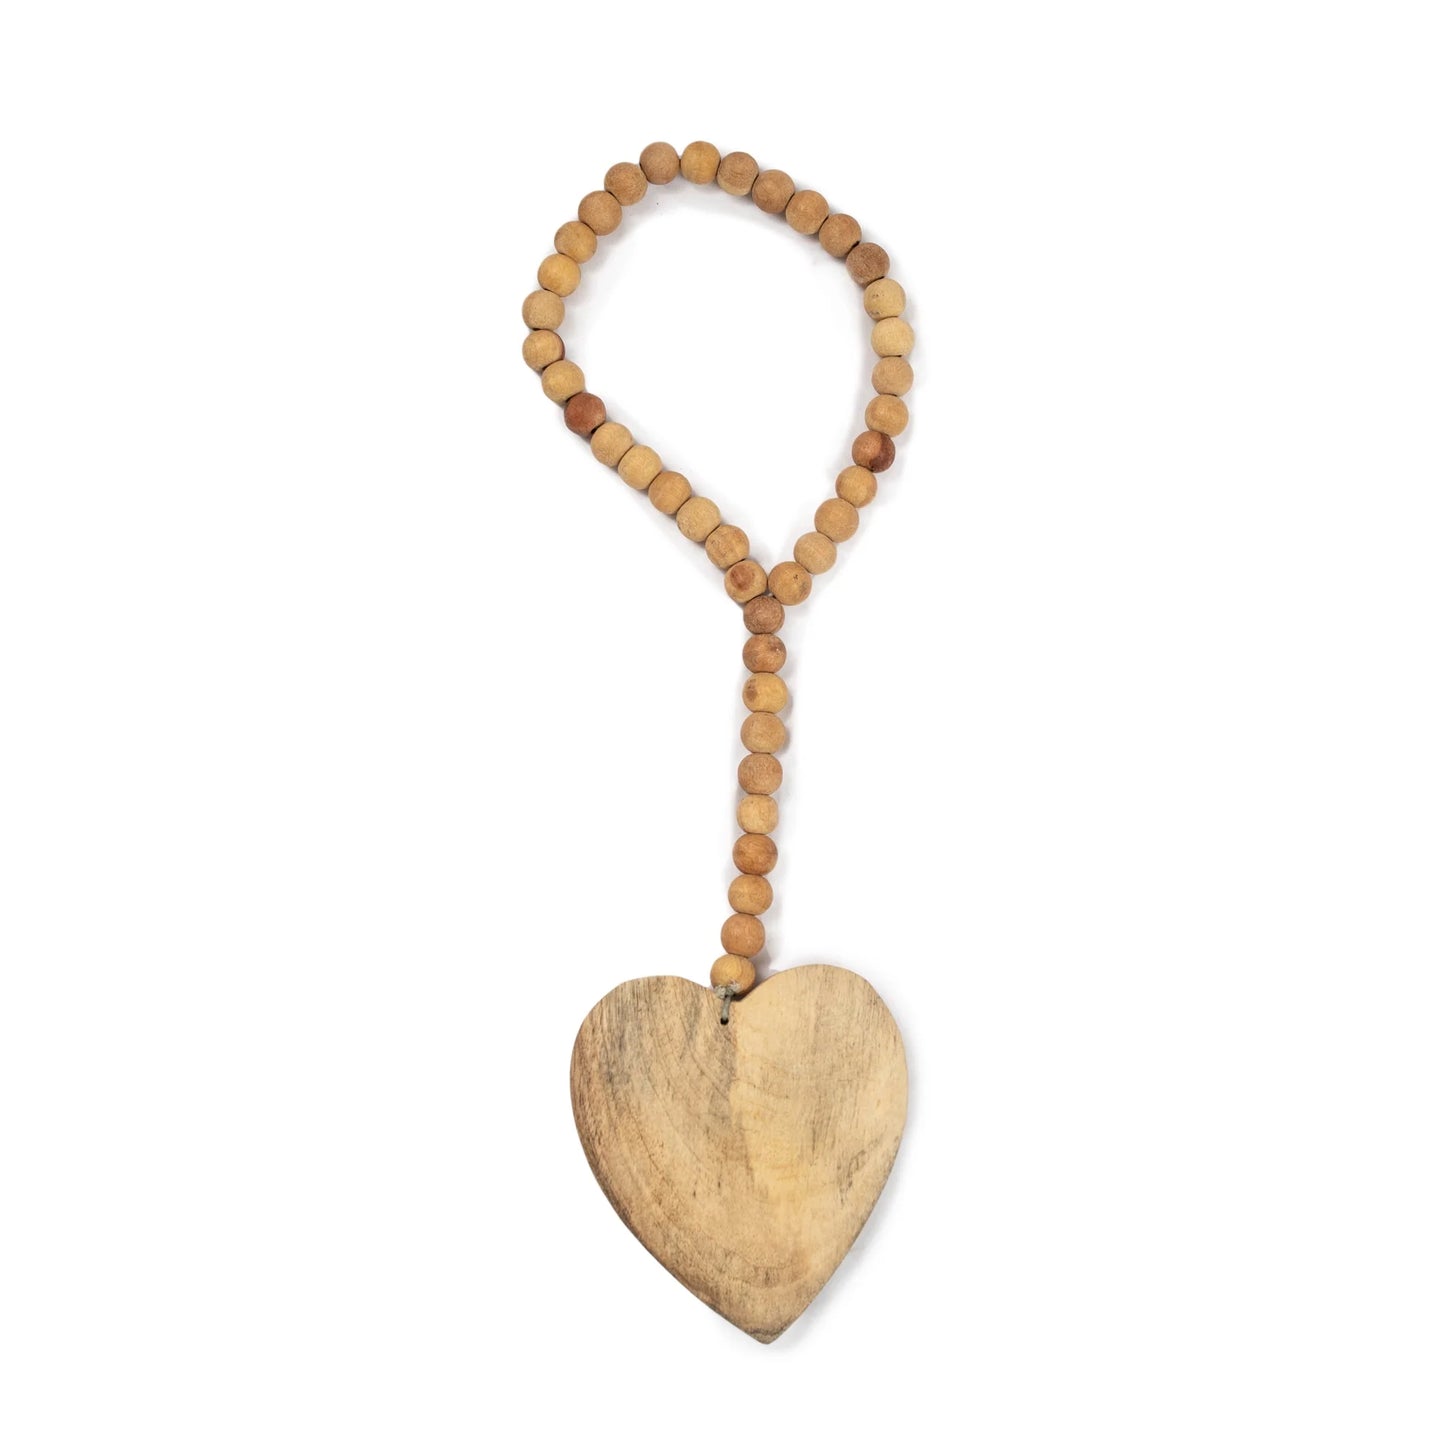 Sugarboo - Small Heart on Natural Wood Bead Strand